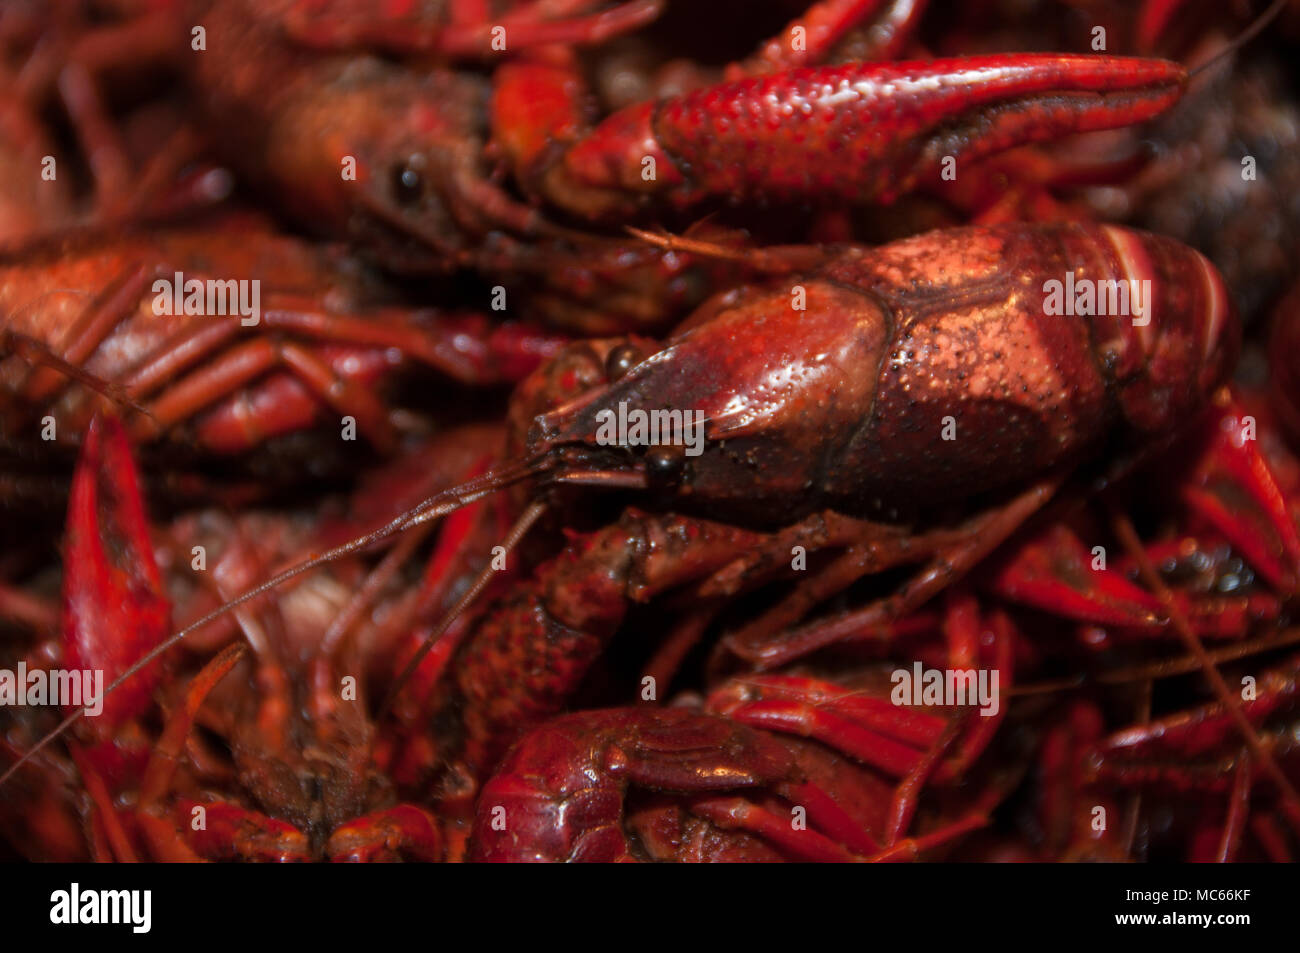 Bright Red pile of cooked Crawdads Stock Photo